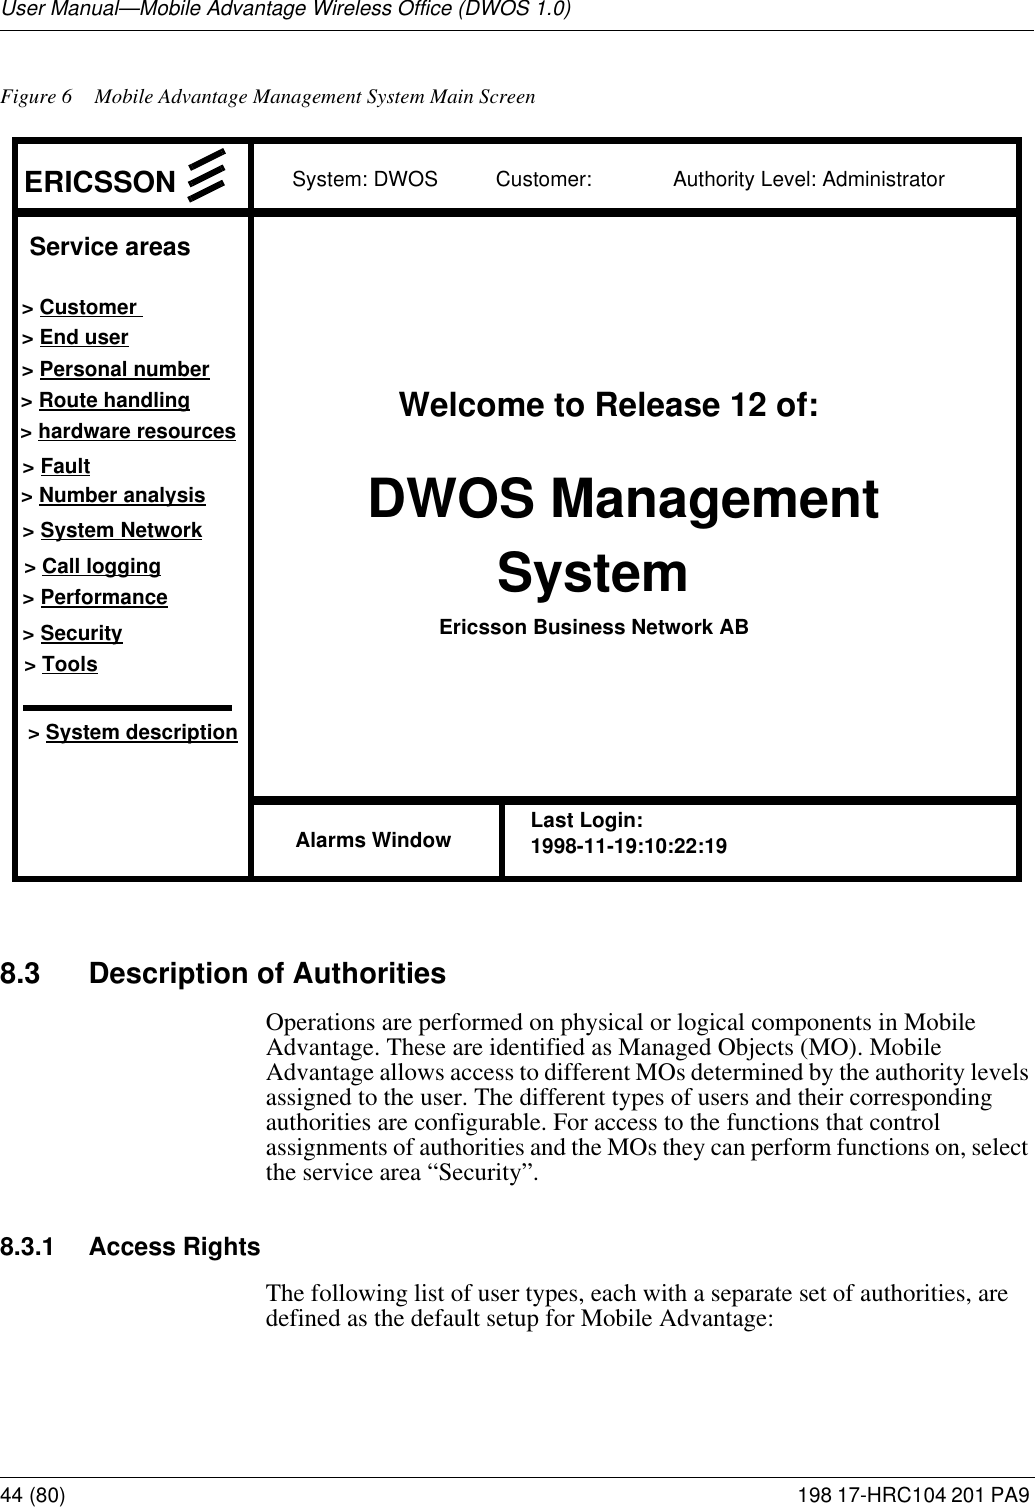 User Manual—Mobile Advantage Wireless Office (DWOS 1.0)44 (80) 198 17-HRC104 201 PA9 Figure 6 Mobile Advantage Management System Main Screen8.3 Description of AuthoritiesOperations are performed on physical or logical components in Mobile Advantage. These are identified as Managed Objects (MO). Mobile Advantage allows access to different MOs determined by the authority levels assigned to the user. The different types of users and their corresponding authorities are configurable. For access to the functions that control assignments of authorities and the MOs they can perform functions on, select the service area “Security”. 8.3.1 Access RightsThe following list of user types, each with a separate set of authorities, are defined as the default setup for Mobile Advantage:System: DWOS          Customer:              Authority Level: Administrator       DWOS Management SystemWelcome to Release 12 of:Ericsson Business Network AB&gt; End user&gt; Personal number&gt; Route handling&gt; hardware resources&gt; Fault&gt; Number analysis&gt; System Network&gt; Call logging&gt; Performance&gt; Security&gt; System descriptionERICSSONAlarms WindowService areas&gt; Customer &gt; ToolsLast Login:1998-11-19:10:22:19 